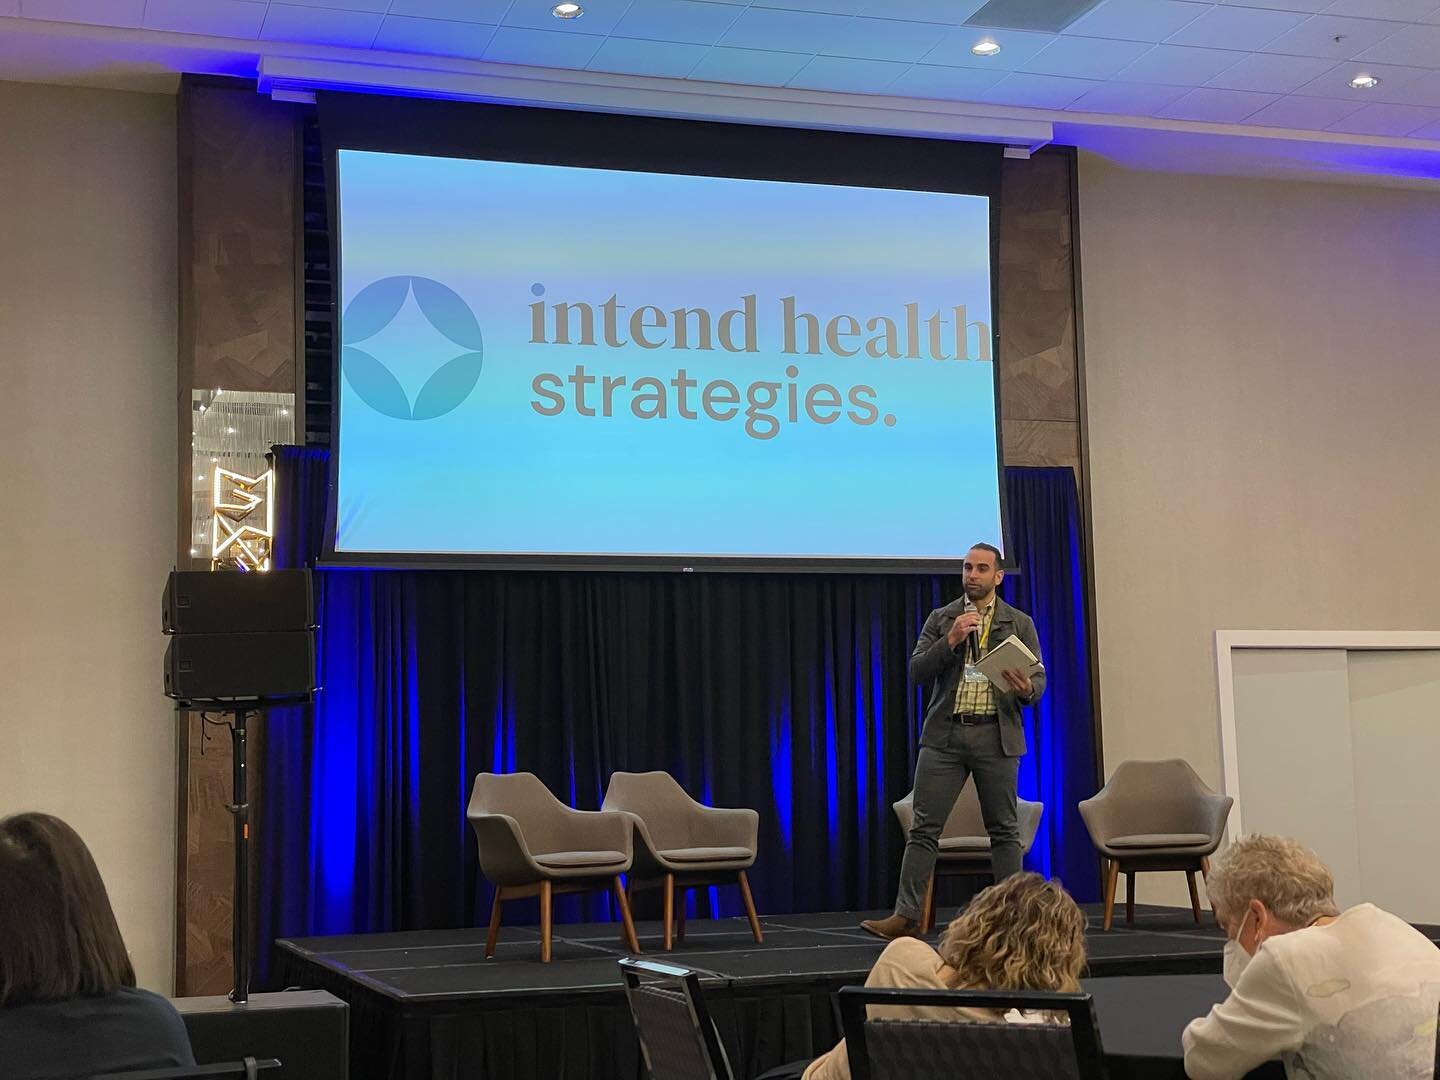 Members of RELATE Lab participated in the inaugural RL Convening in Atlanta, Georgia this past week. The gathering, hosted by Intend Health Strategies, brought together folks across the country (and Canada!) who are passionate about relational leader